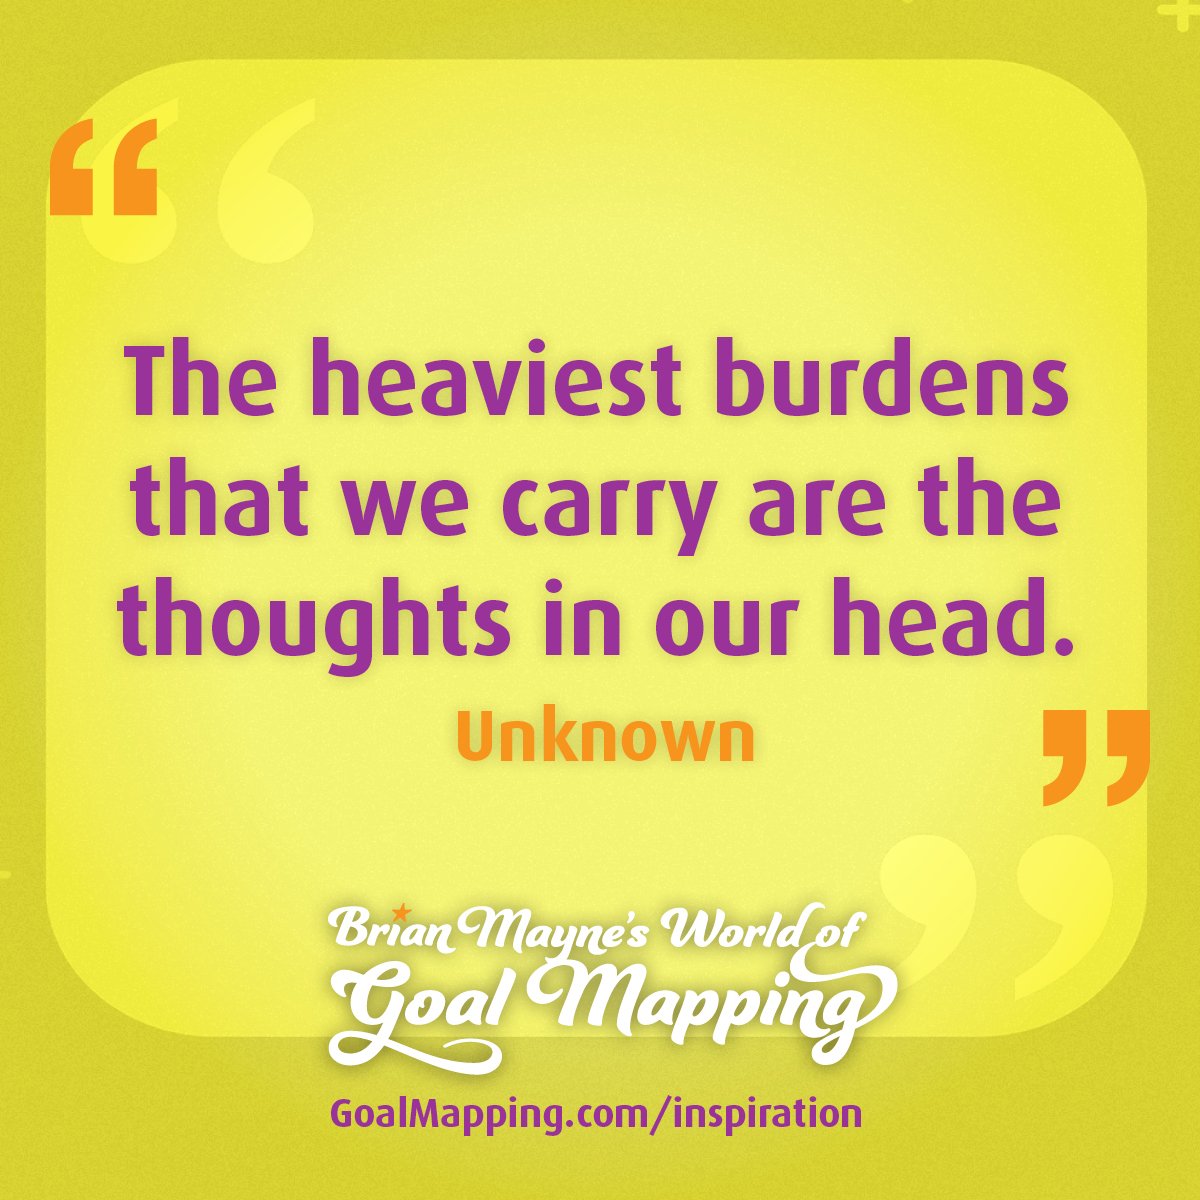 "The heaviest burdens that we carry are the thoughts in our head." Unknown